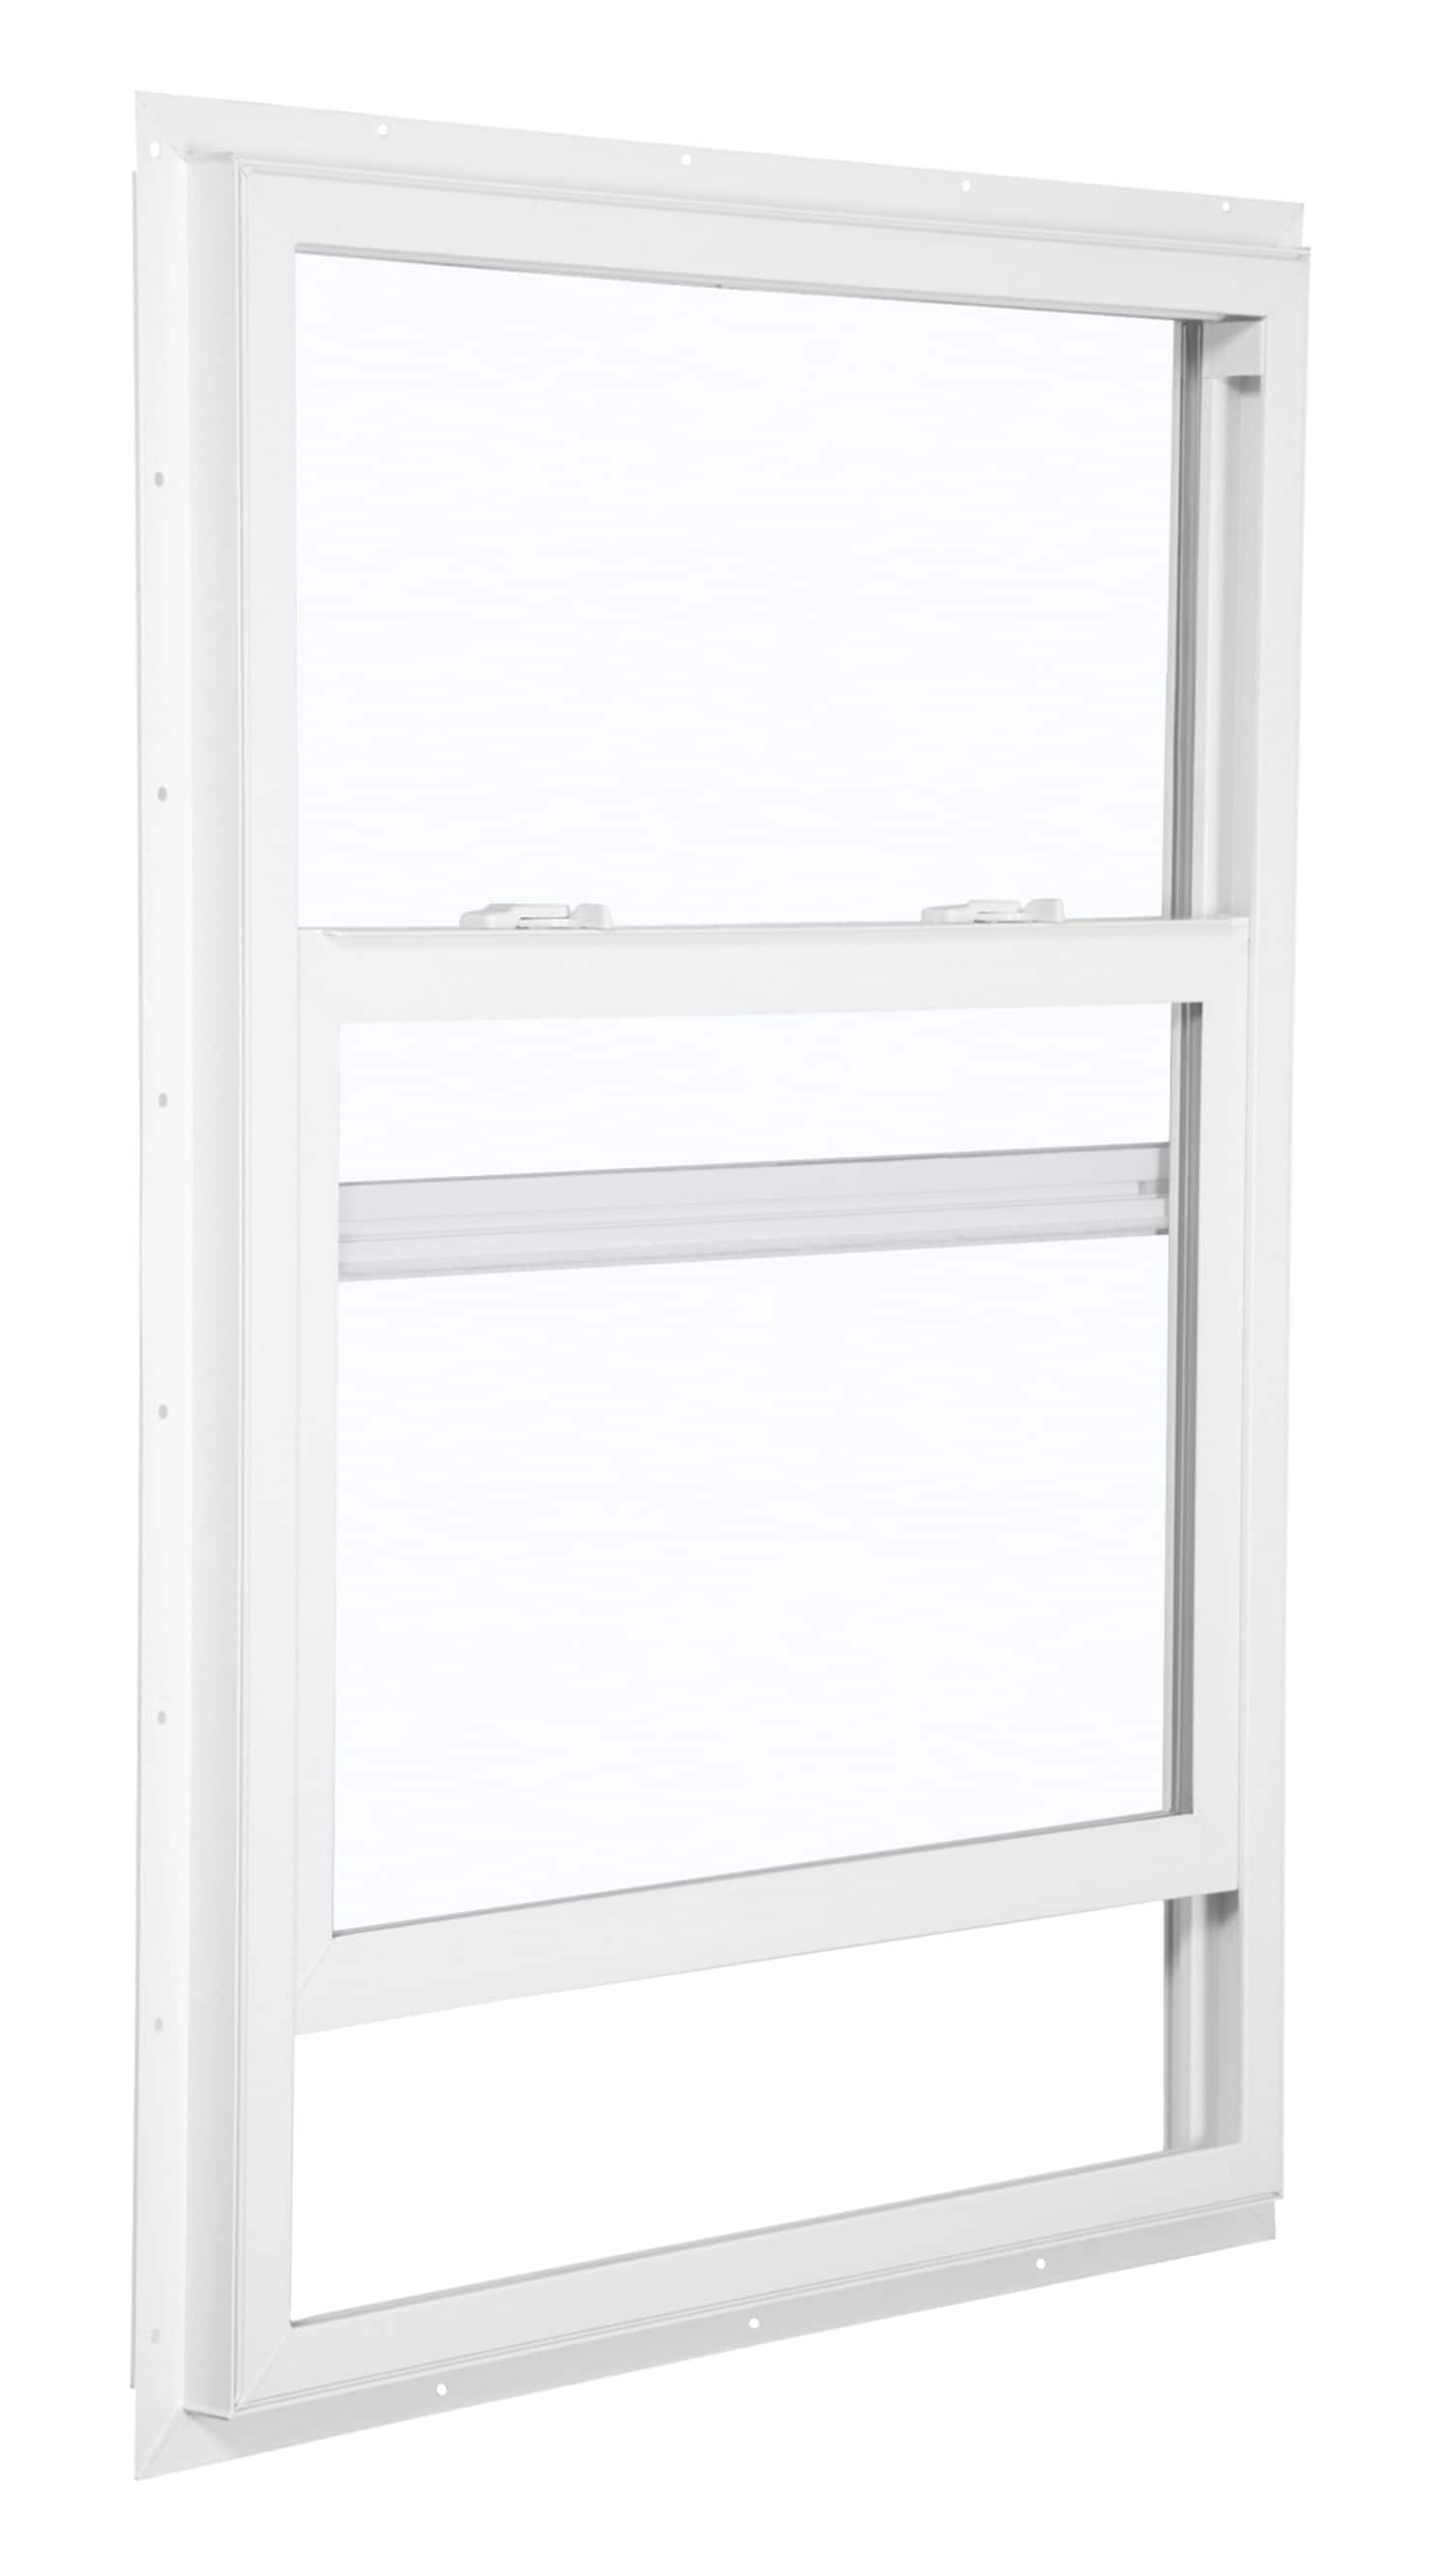 RELIABILT 105SH36360002 105 Series New Construction 35-1/2-in x 35-1/2-in x 2-5/8-in Jamb White Vinyl Dual-pane Single Hung Window Half Screen Included